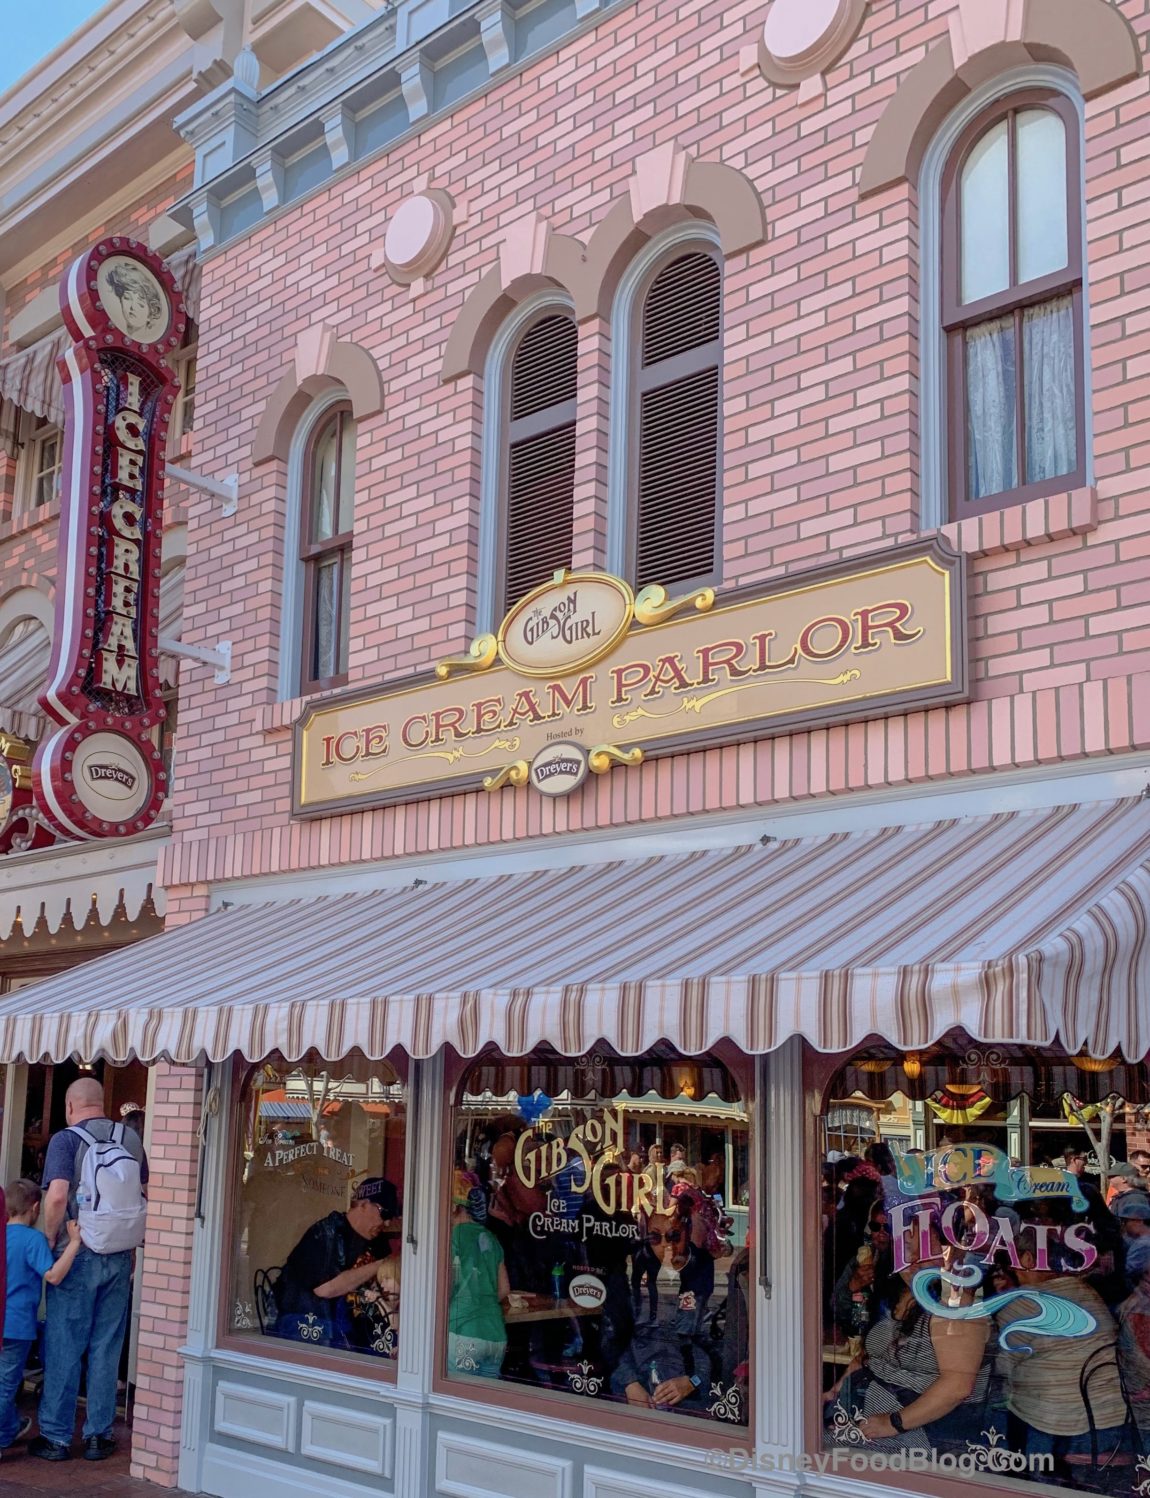 Gibson Girl Ice Cream Parlor - Ice Cream Parlor in The Anaheim Resort